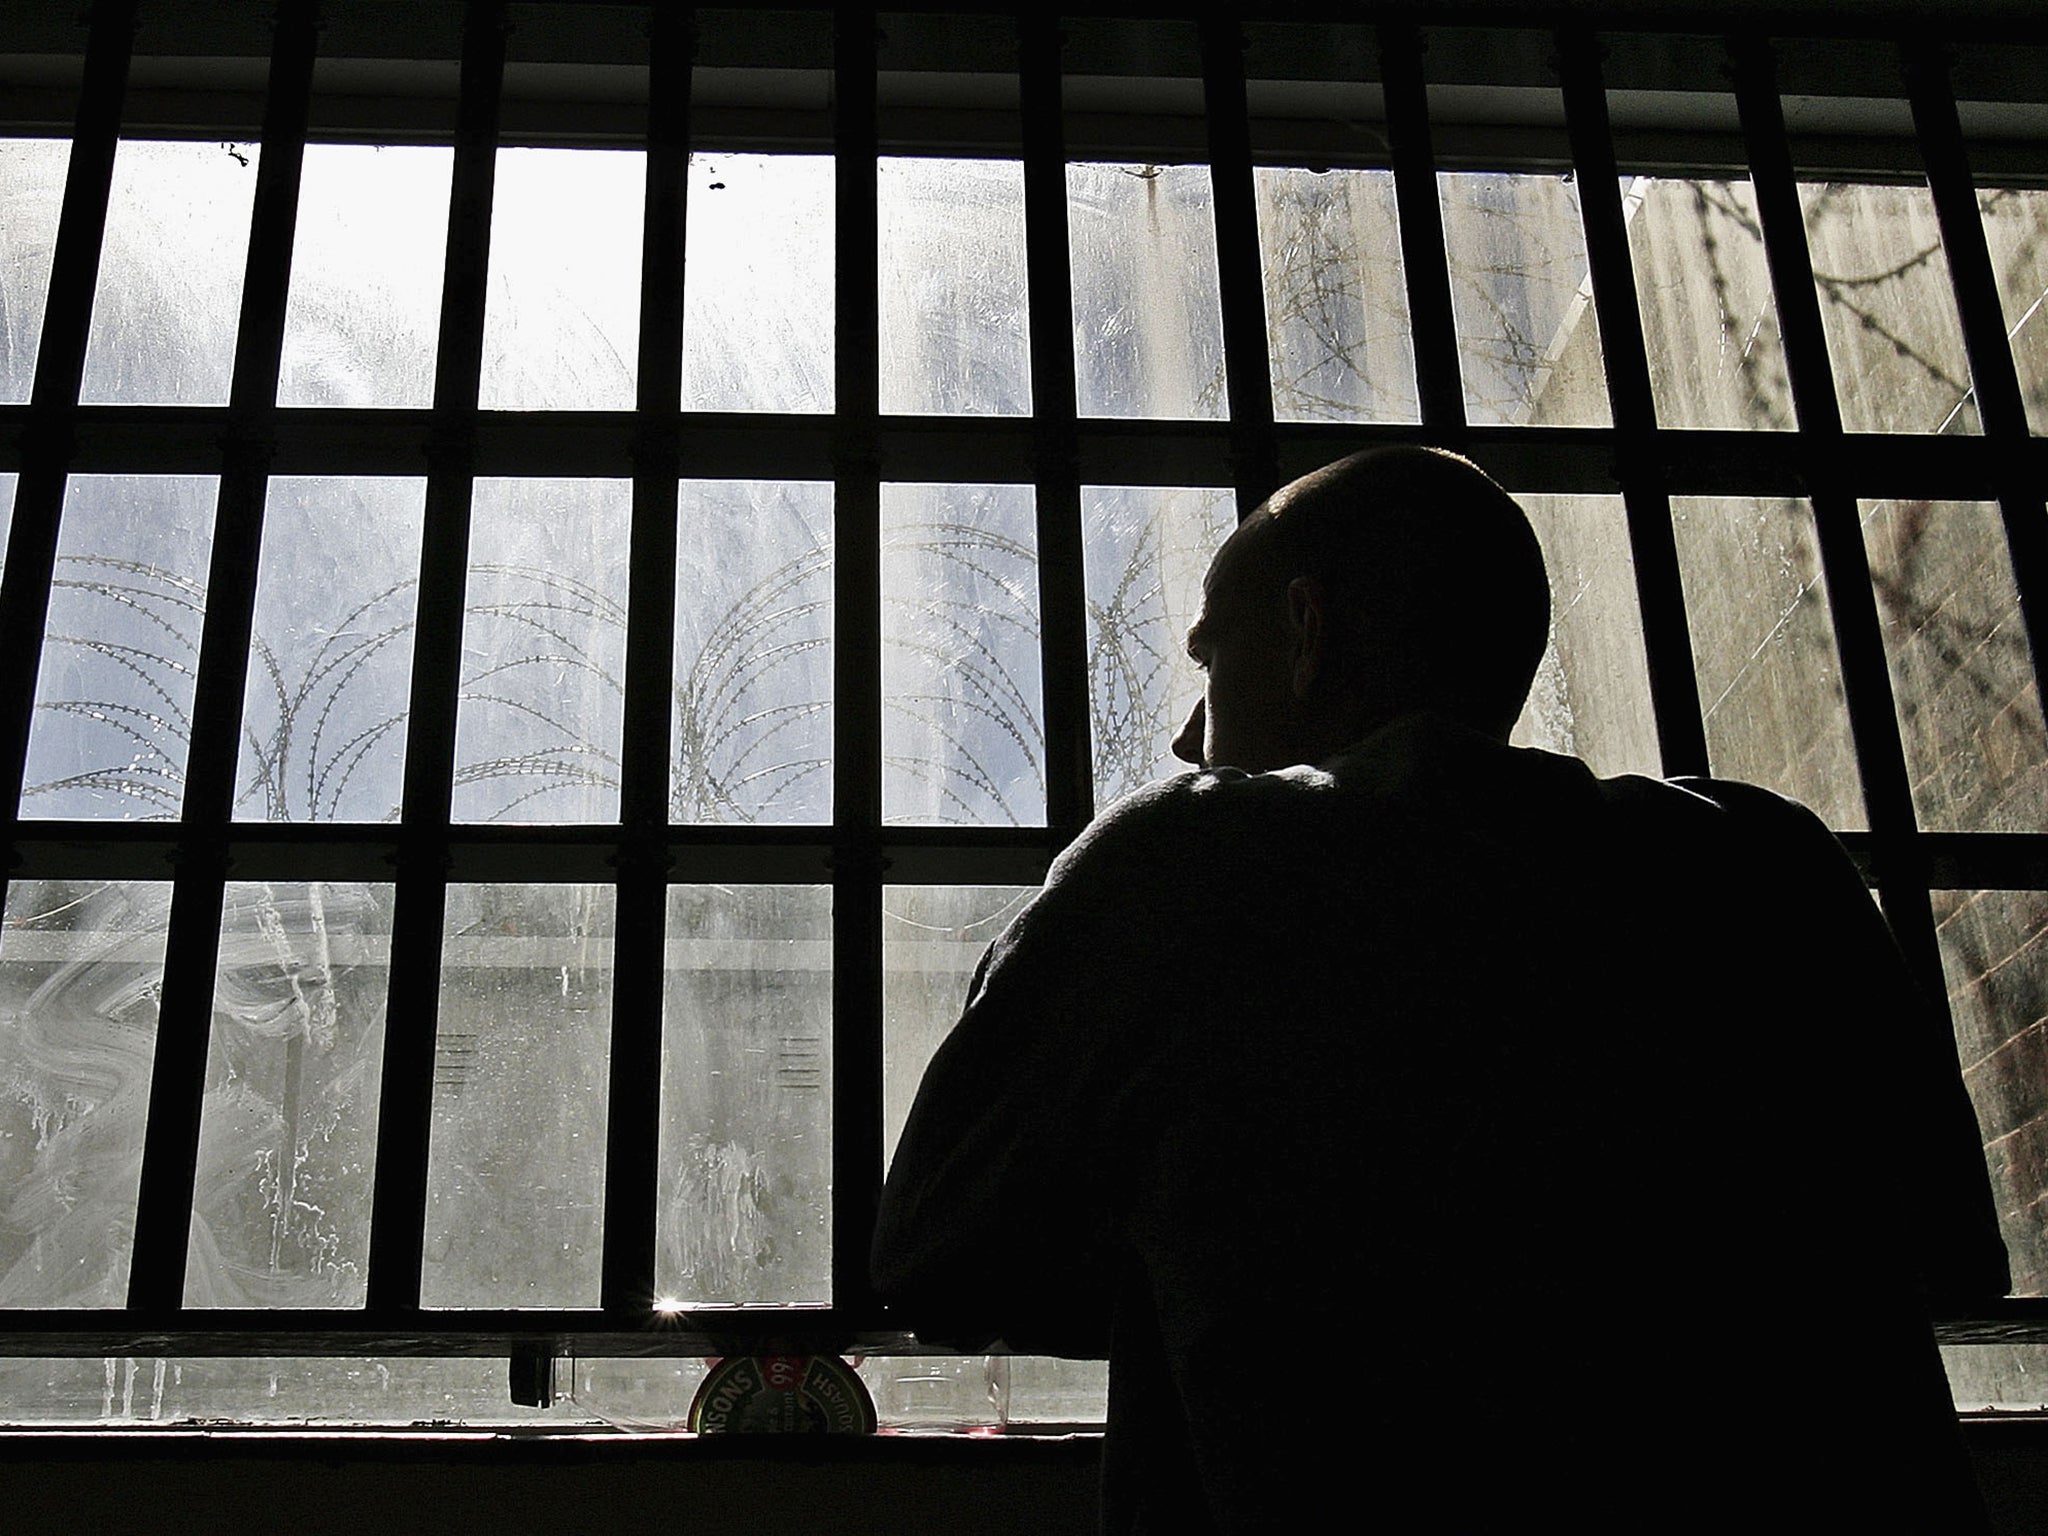 The statistics reveal that 235 prisoners died in the 12 months to the end of September 2014